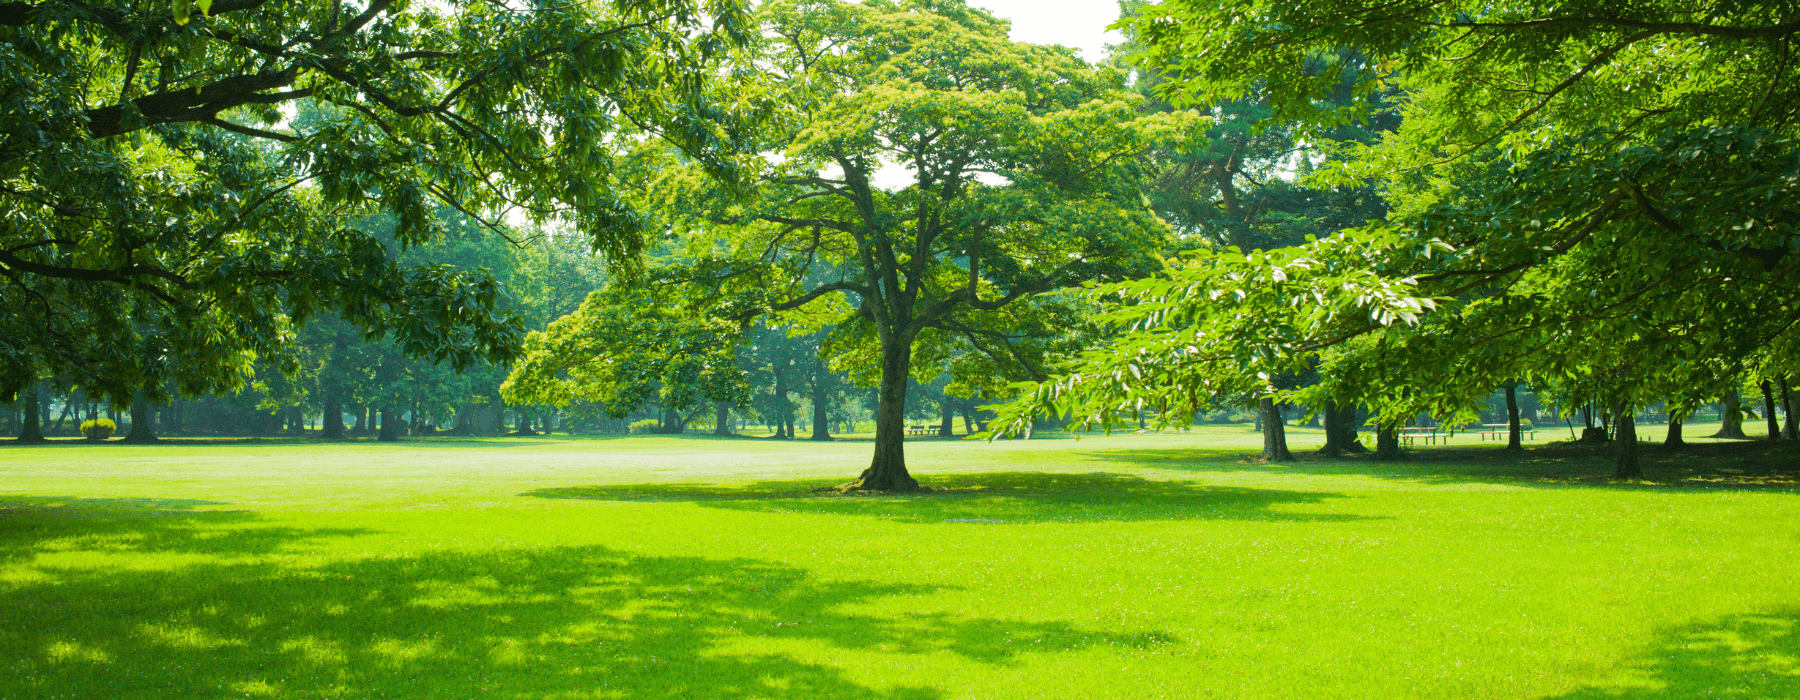 A sunny park with big trees and green grass, with some benches far away.